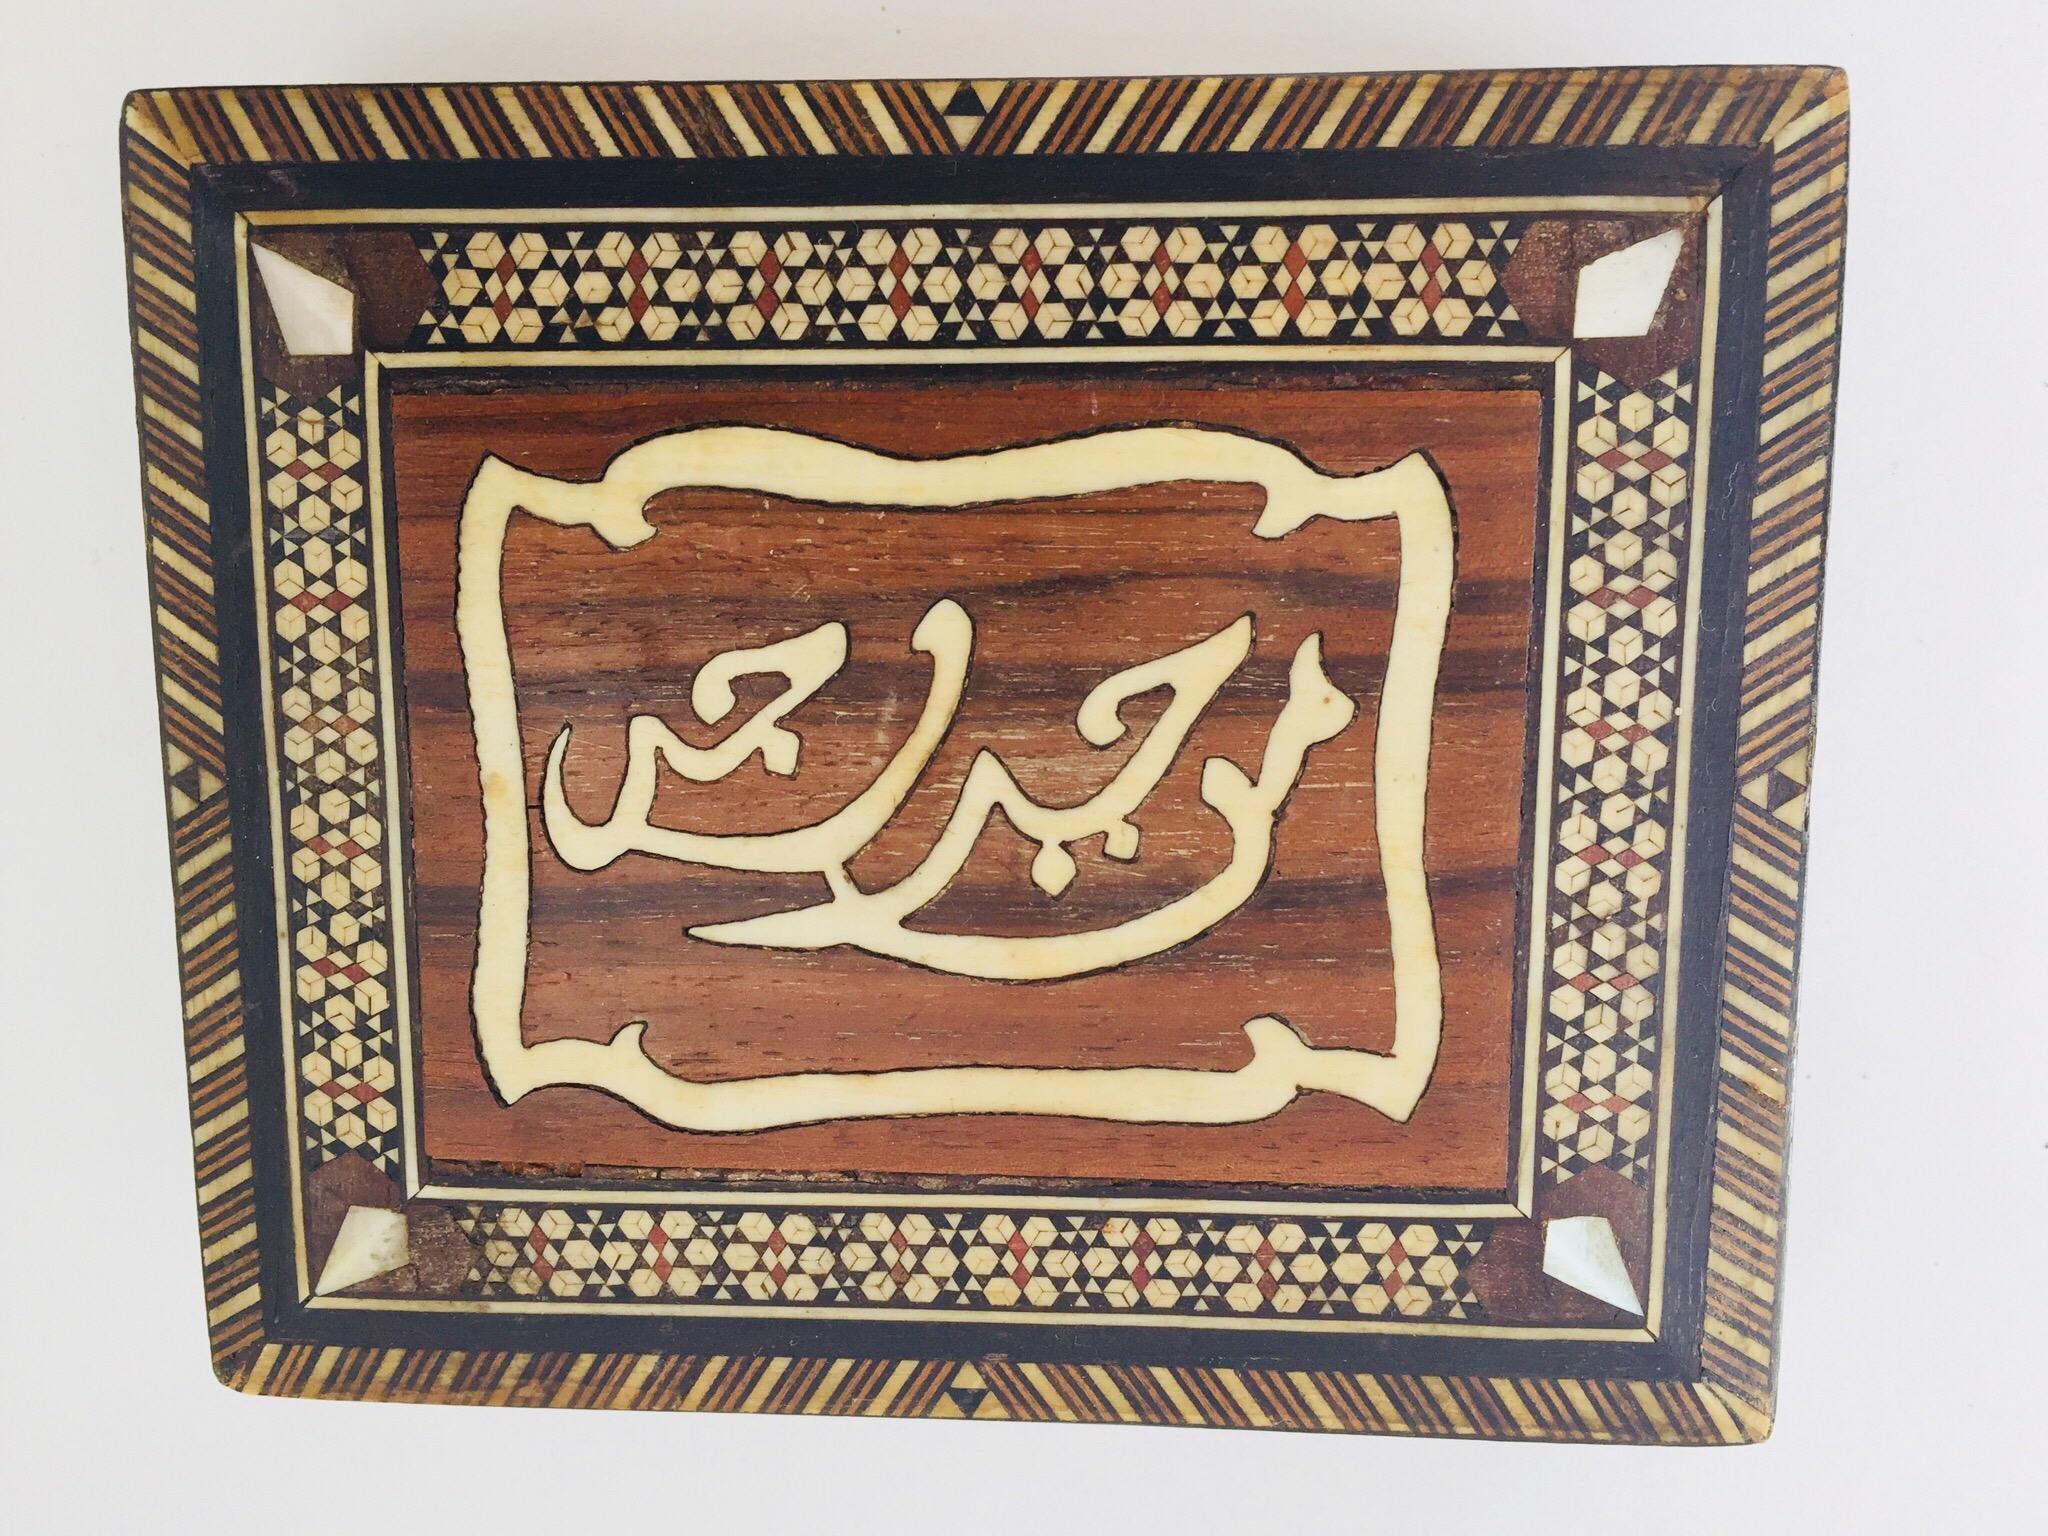 Syrian inlaid marquetry mosaic jewelry box.
The amazing craftsmanship in intricate marquetry fruitwood with mosaic Moorish geometric pattern and mother-of-pearl inlay makes it a true work of art. 
Handcrafted in the Middle East.
Dimensions: